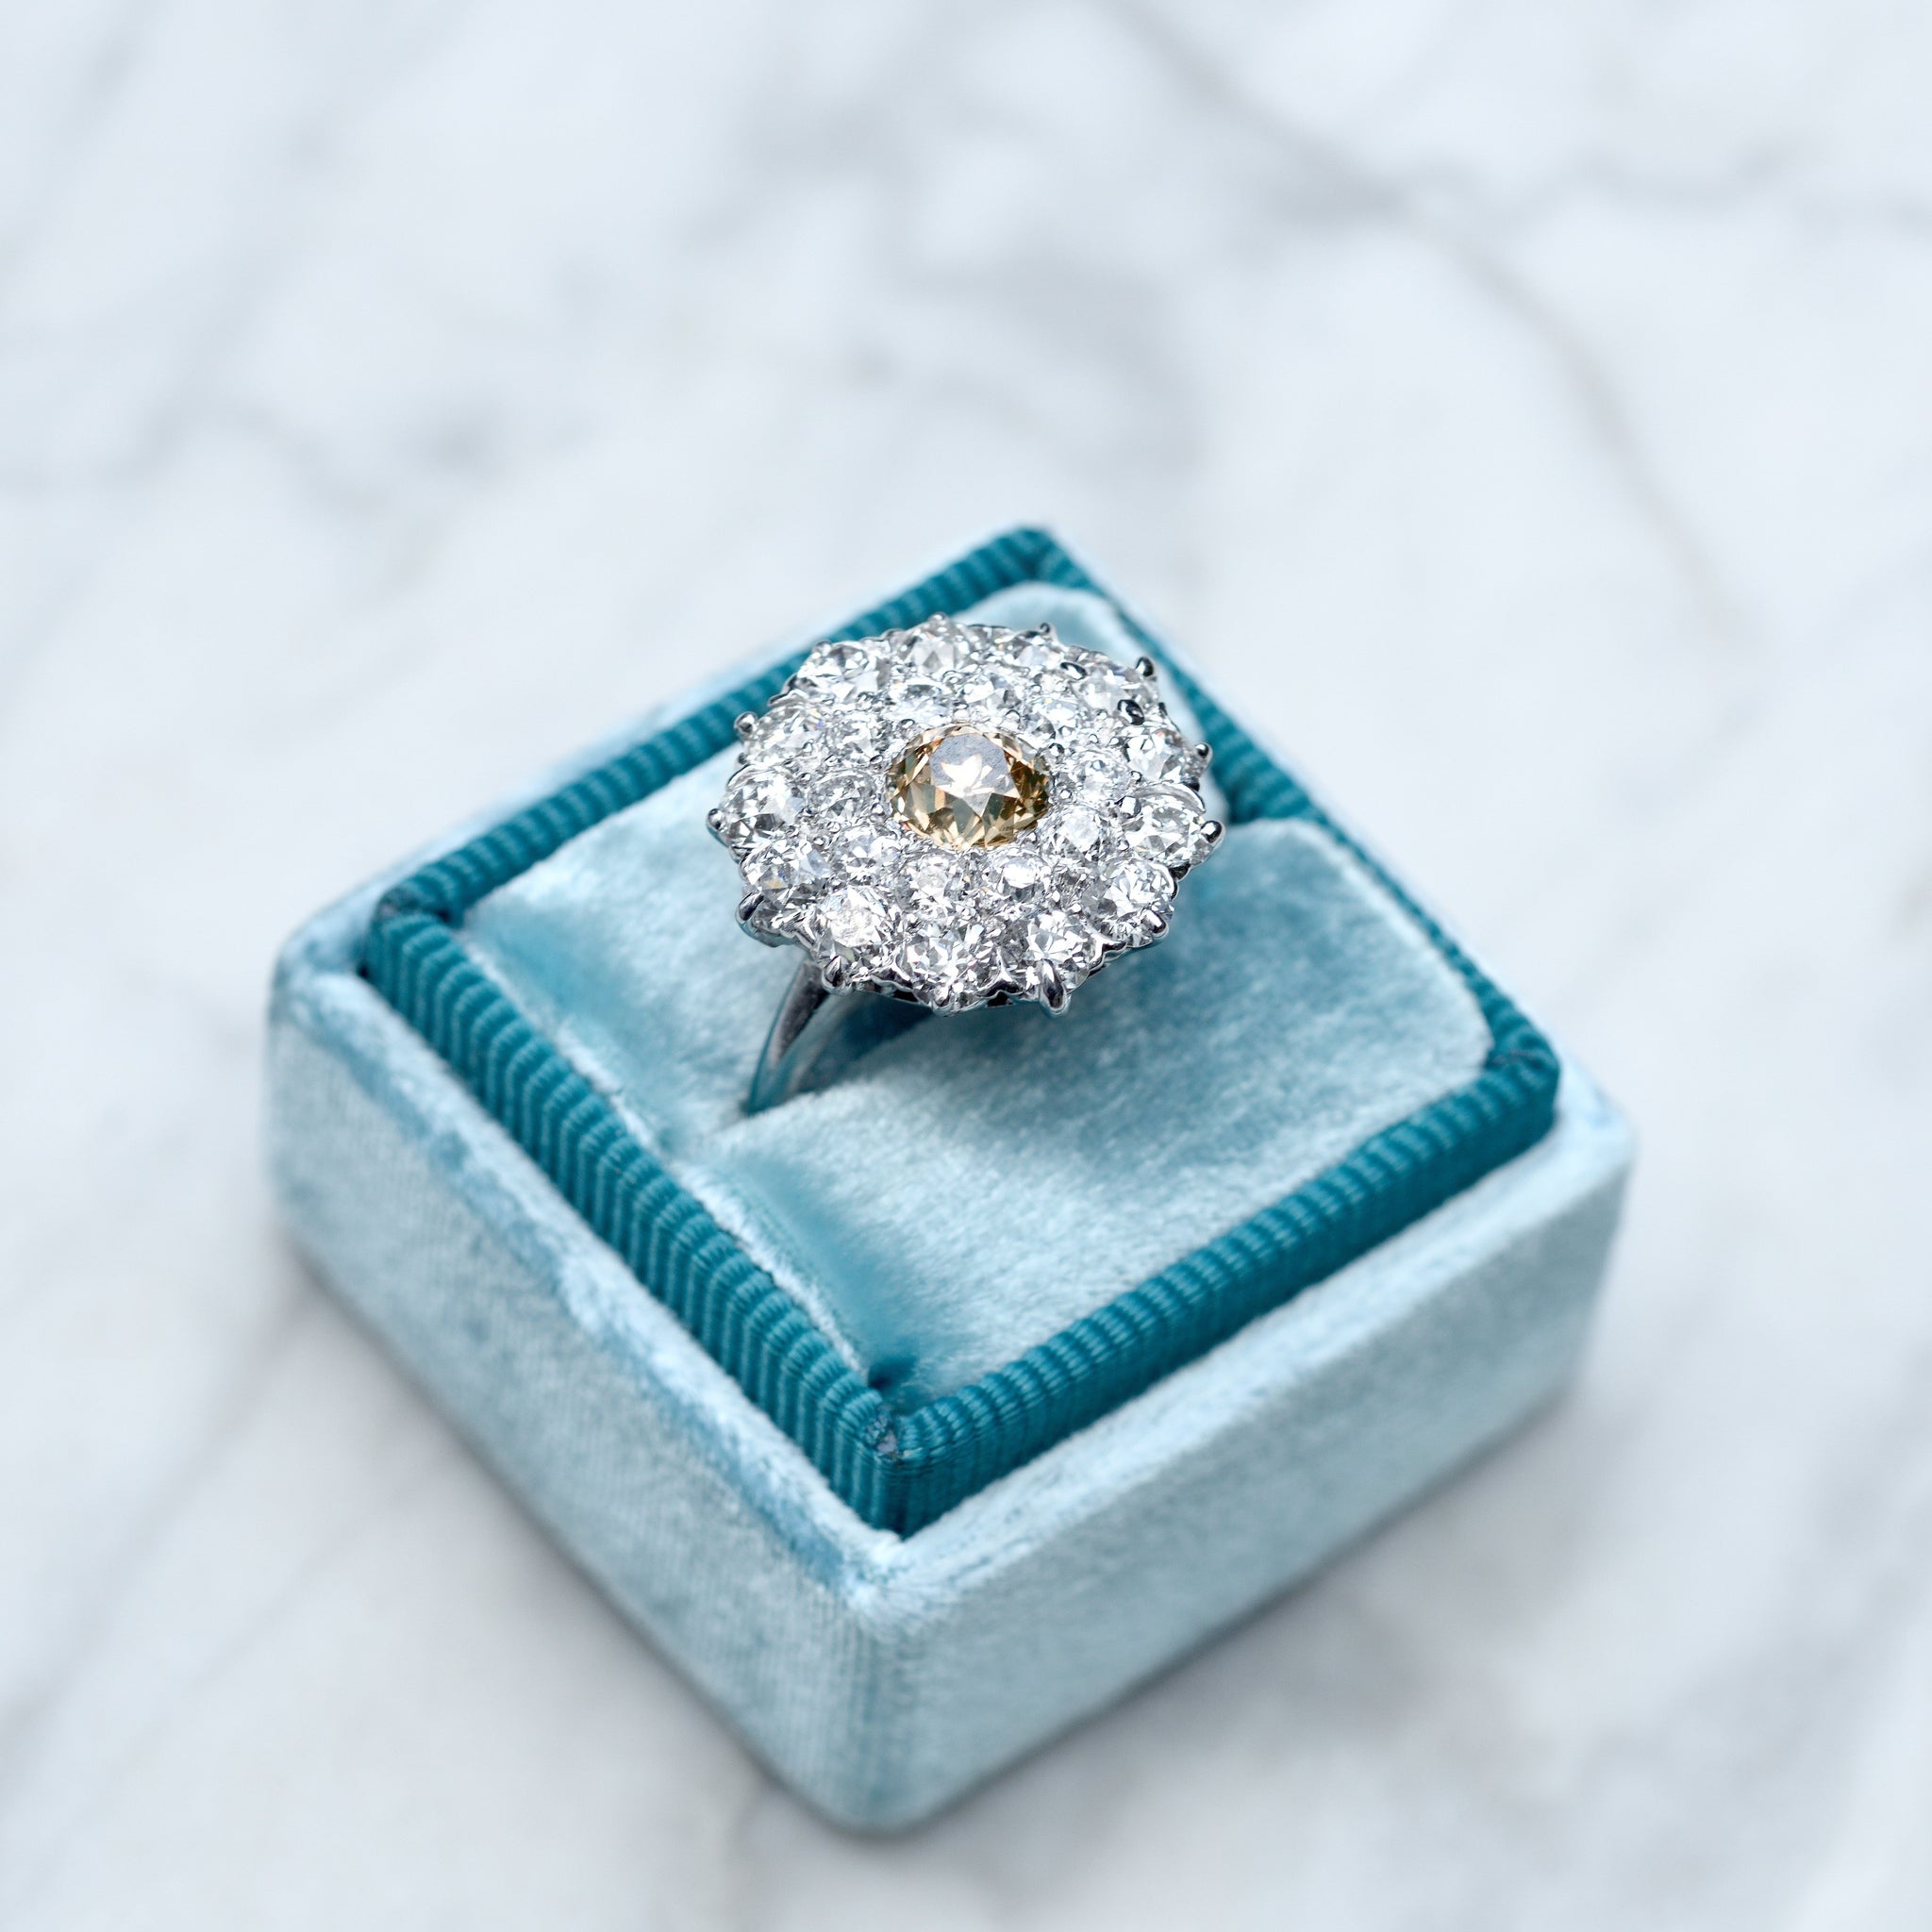 5 Vintage Engagement Rings To Say Yes To